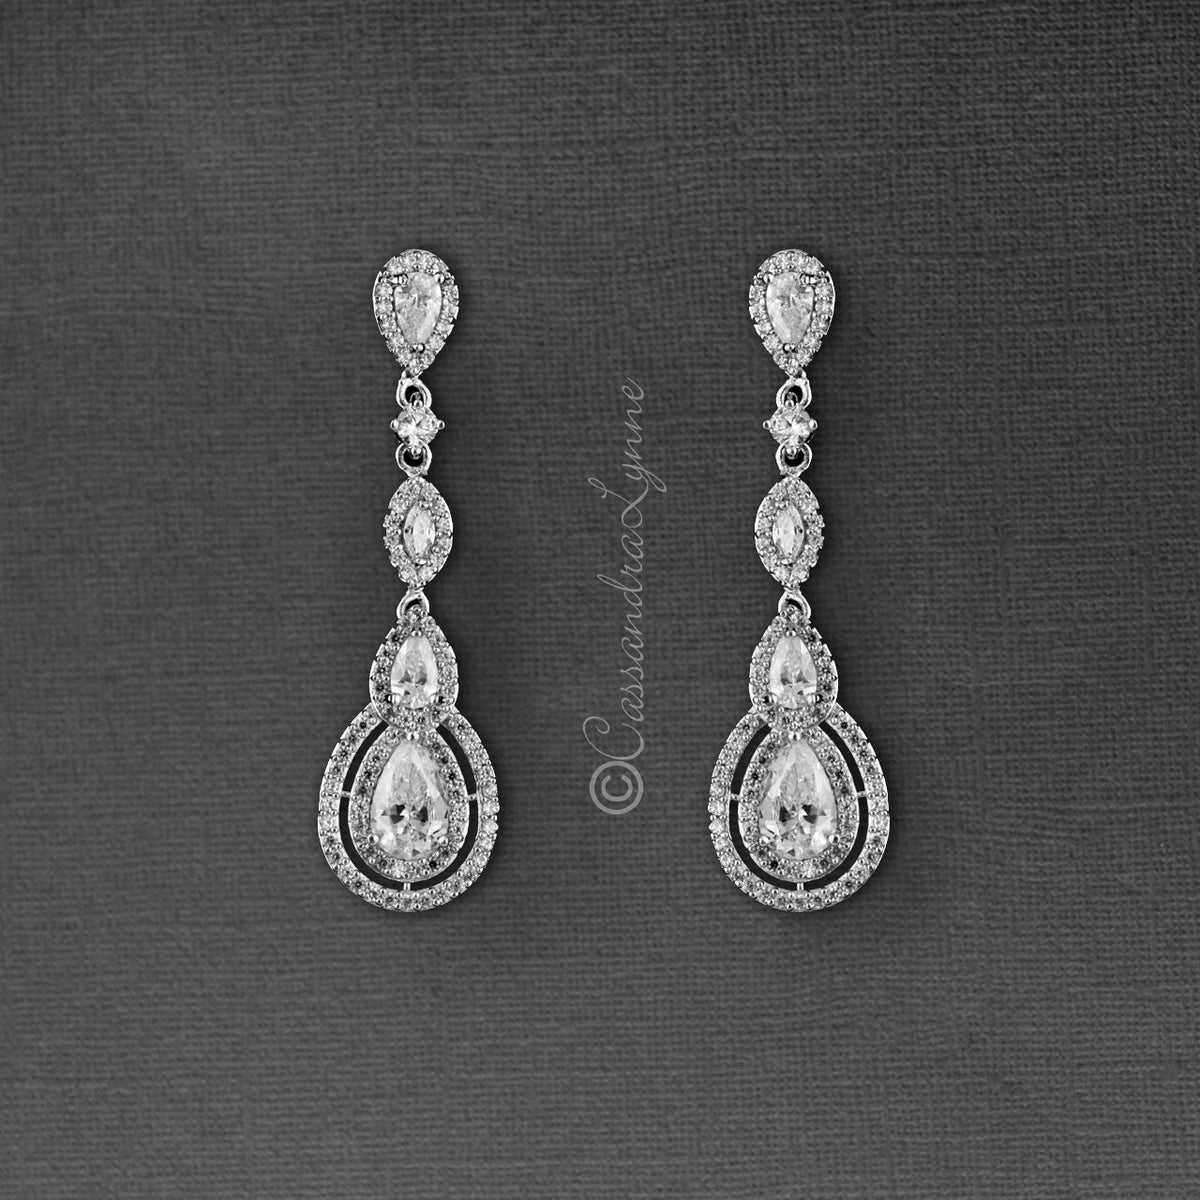 Cubic Zirconia Earrings Pave Teardrop and Marquise